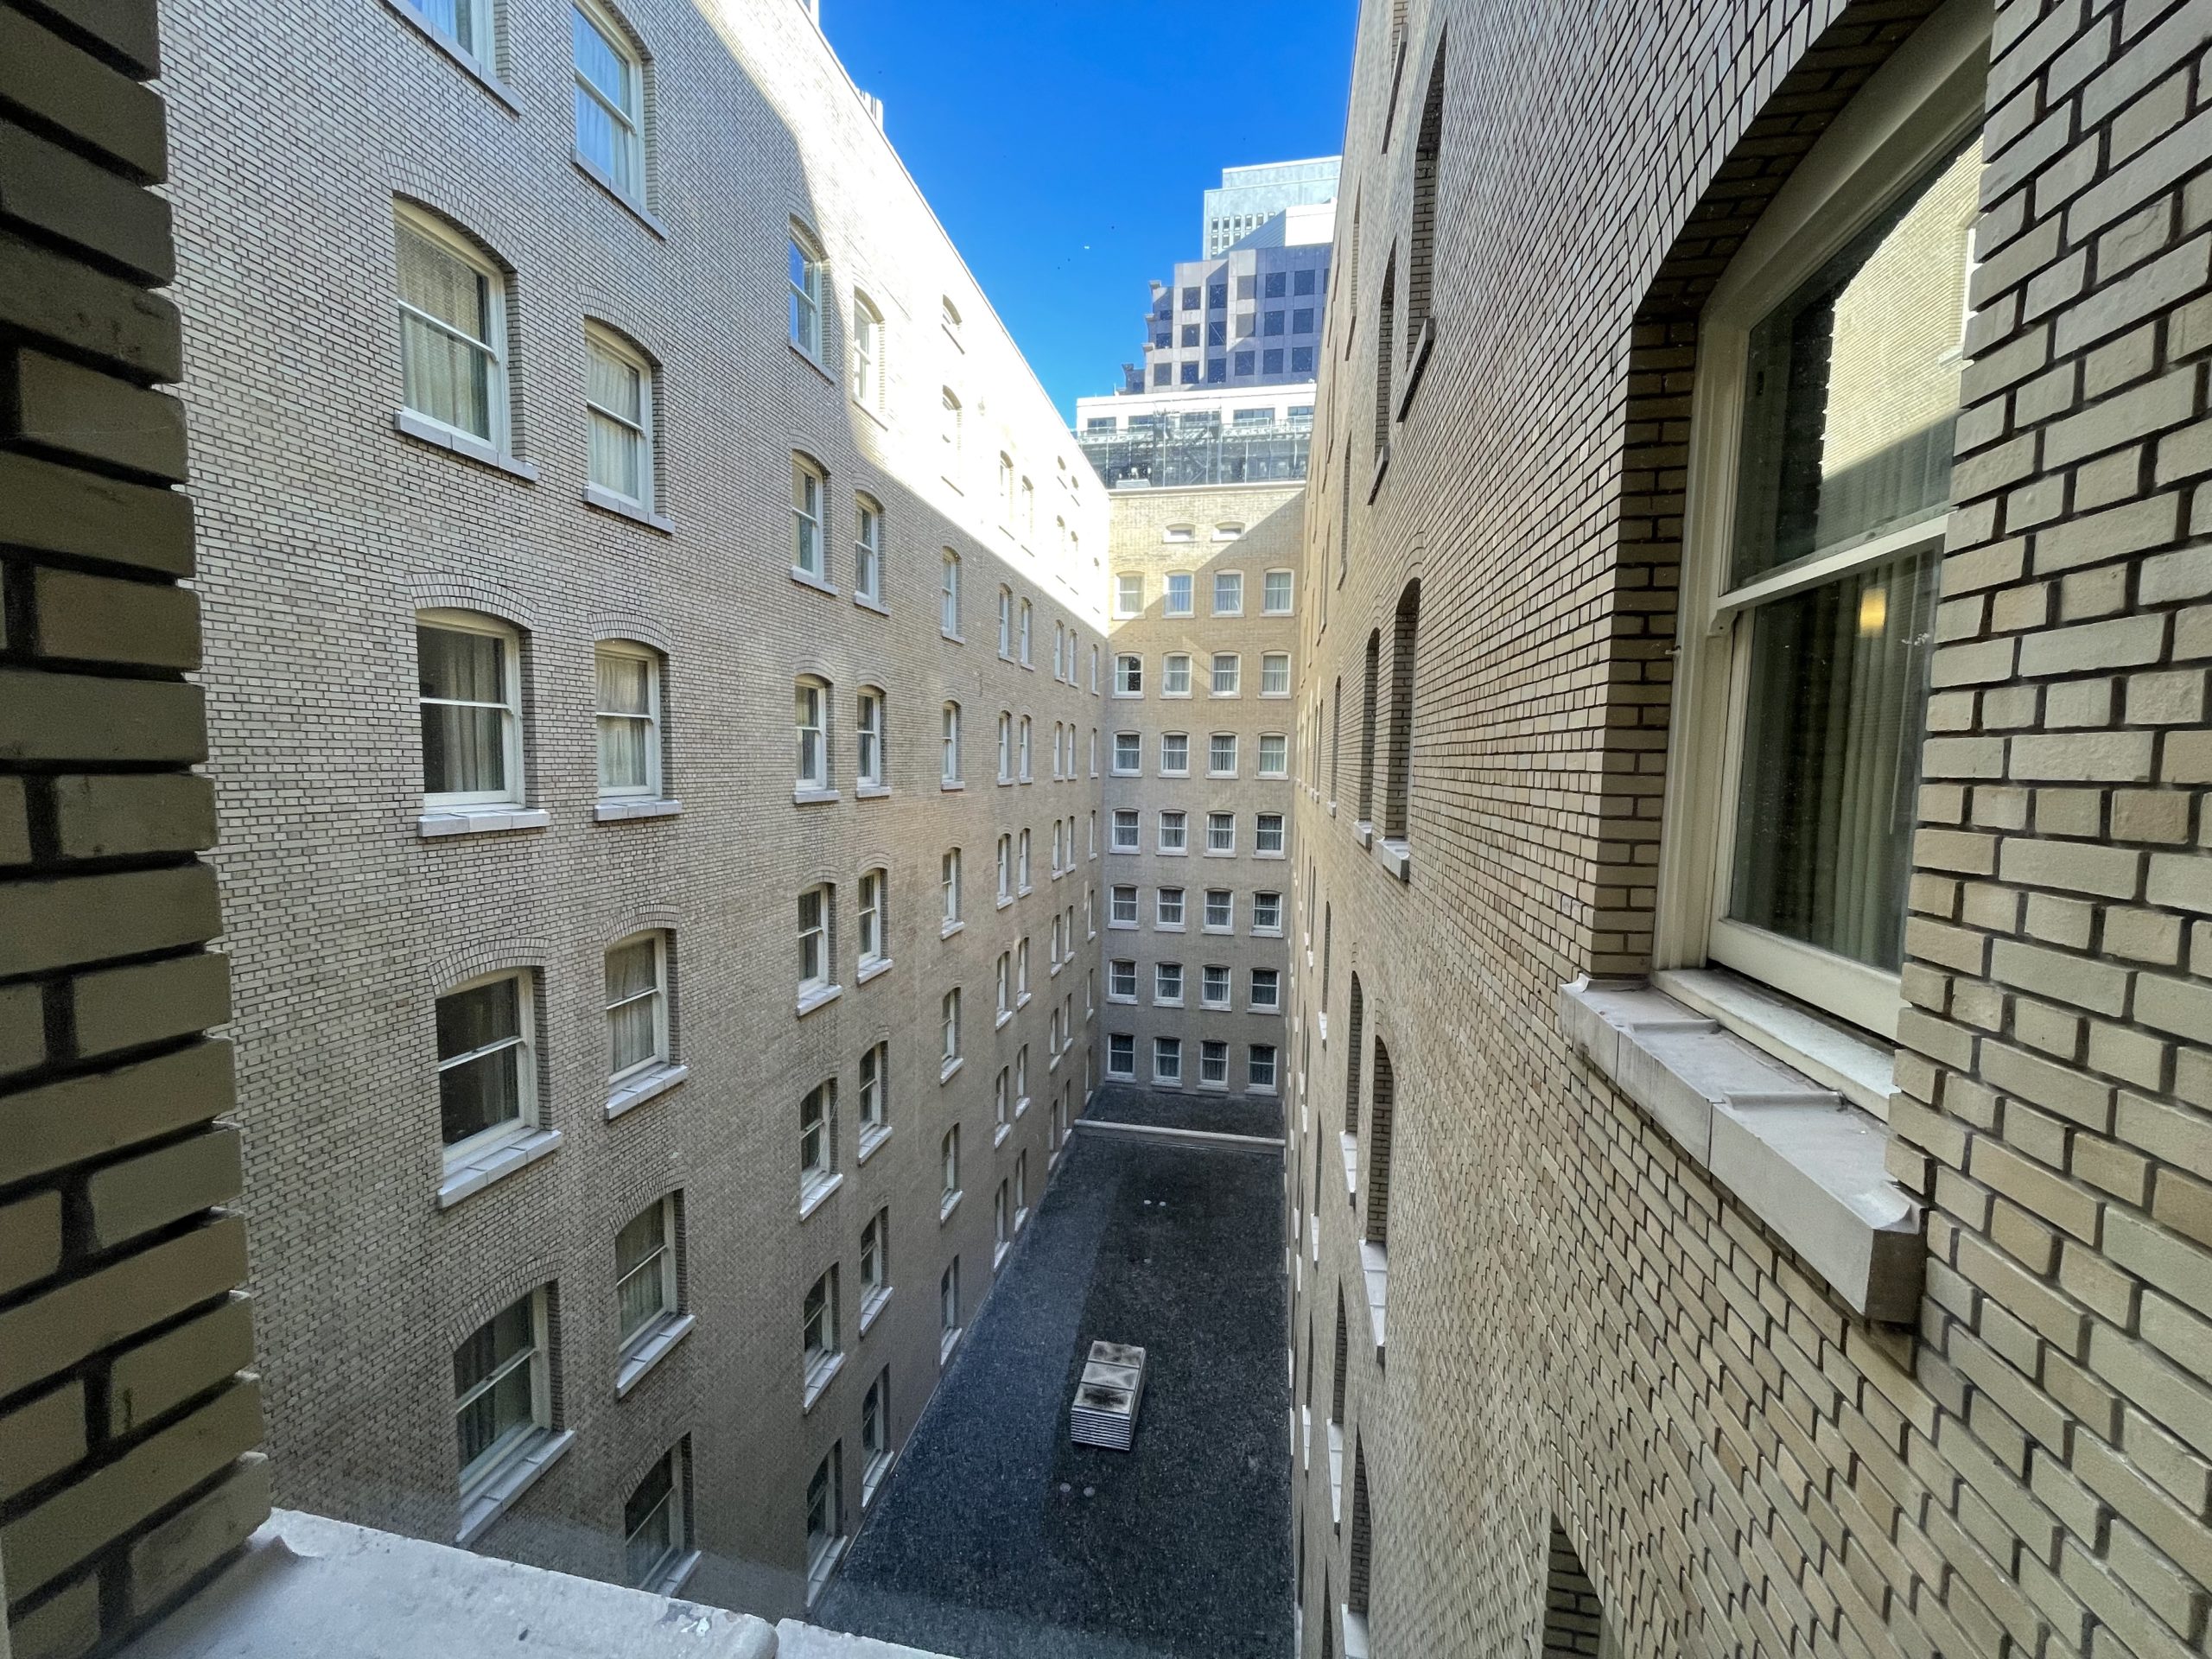 a view from a balcony of a building